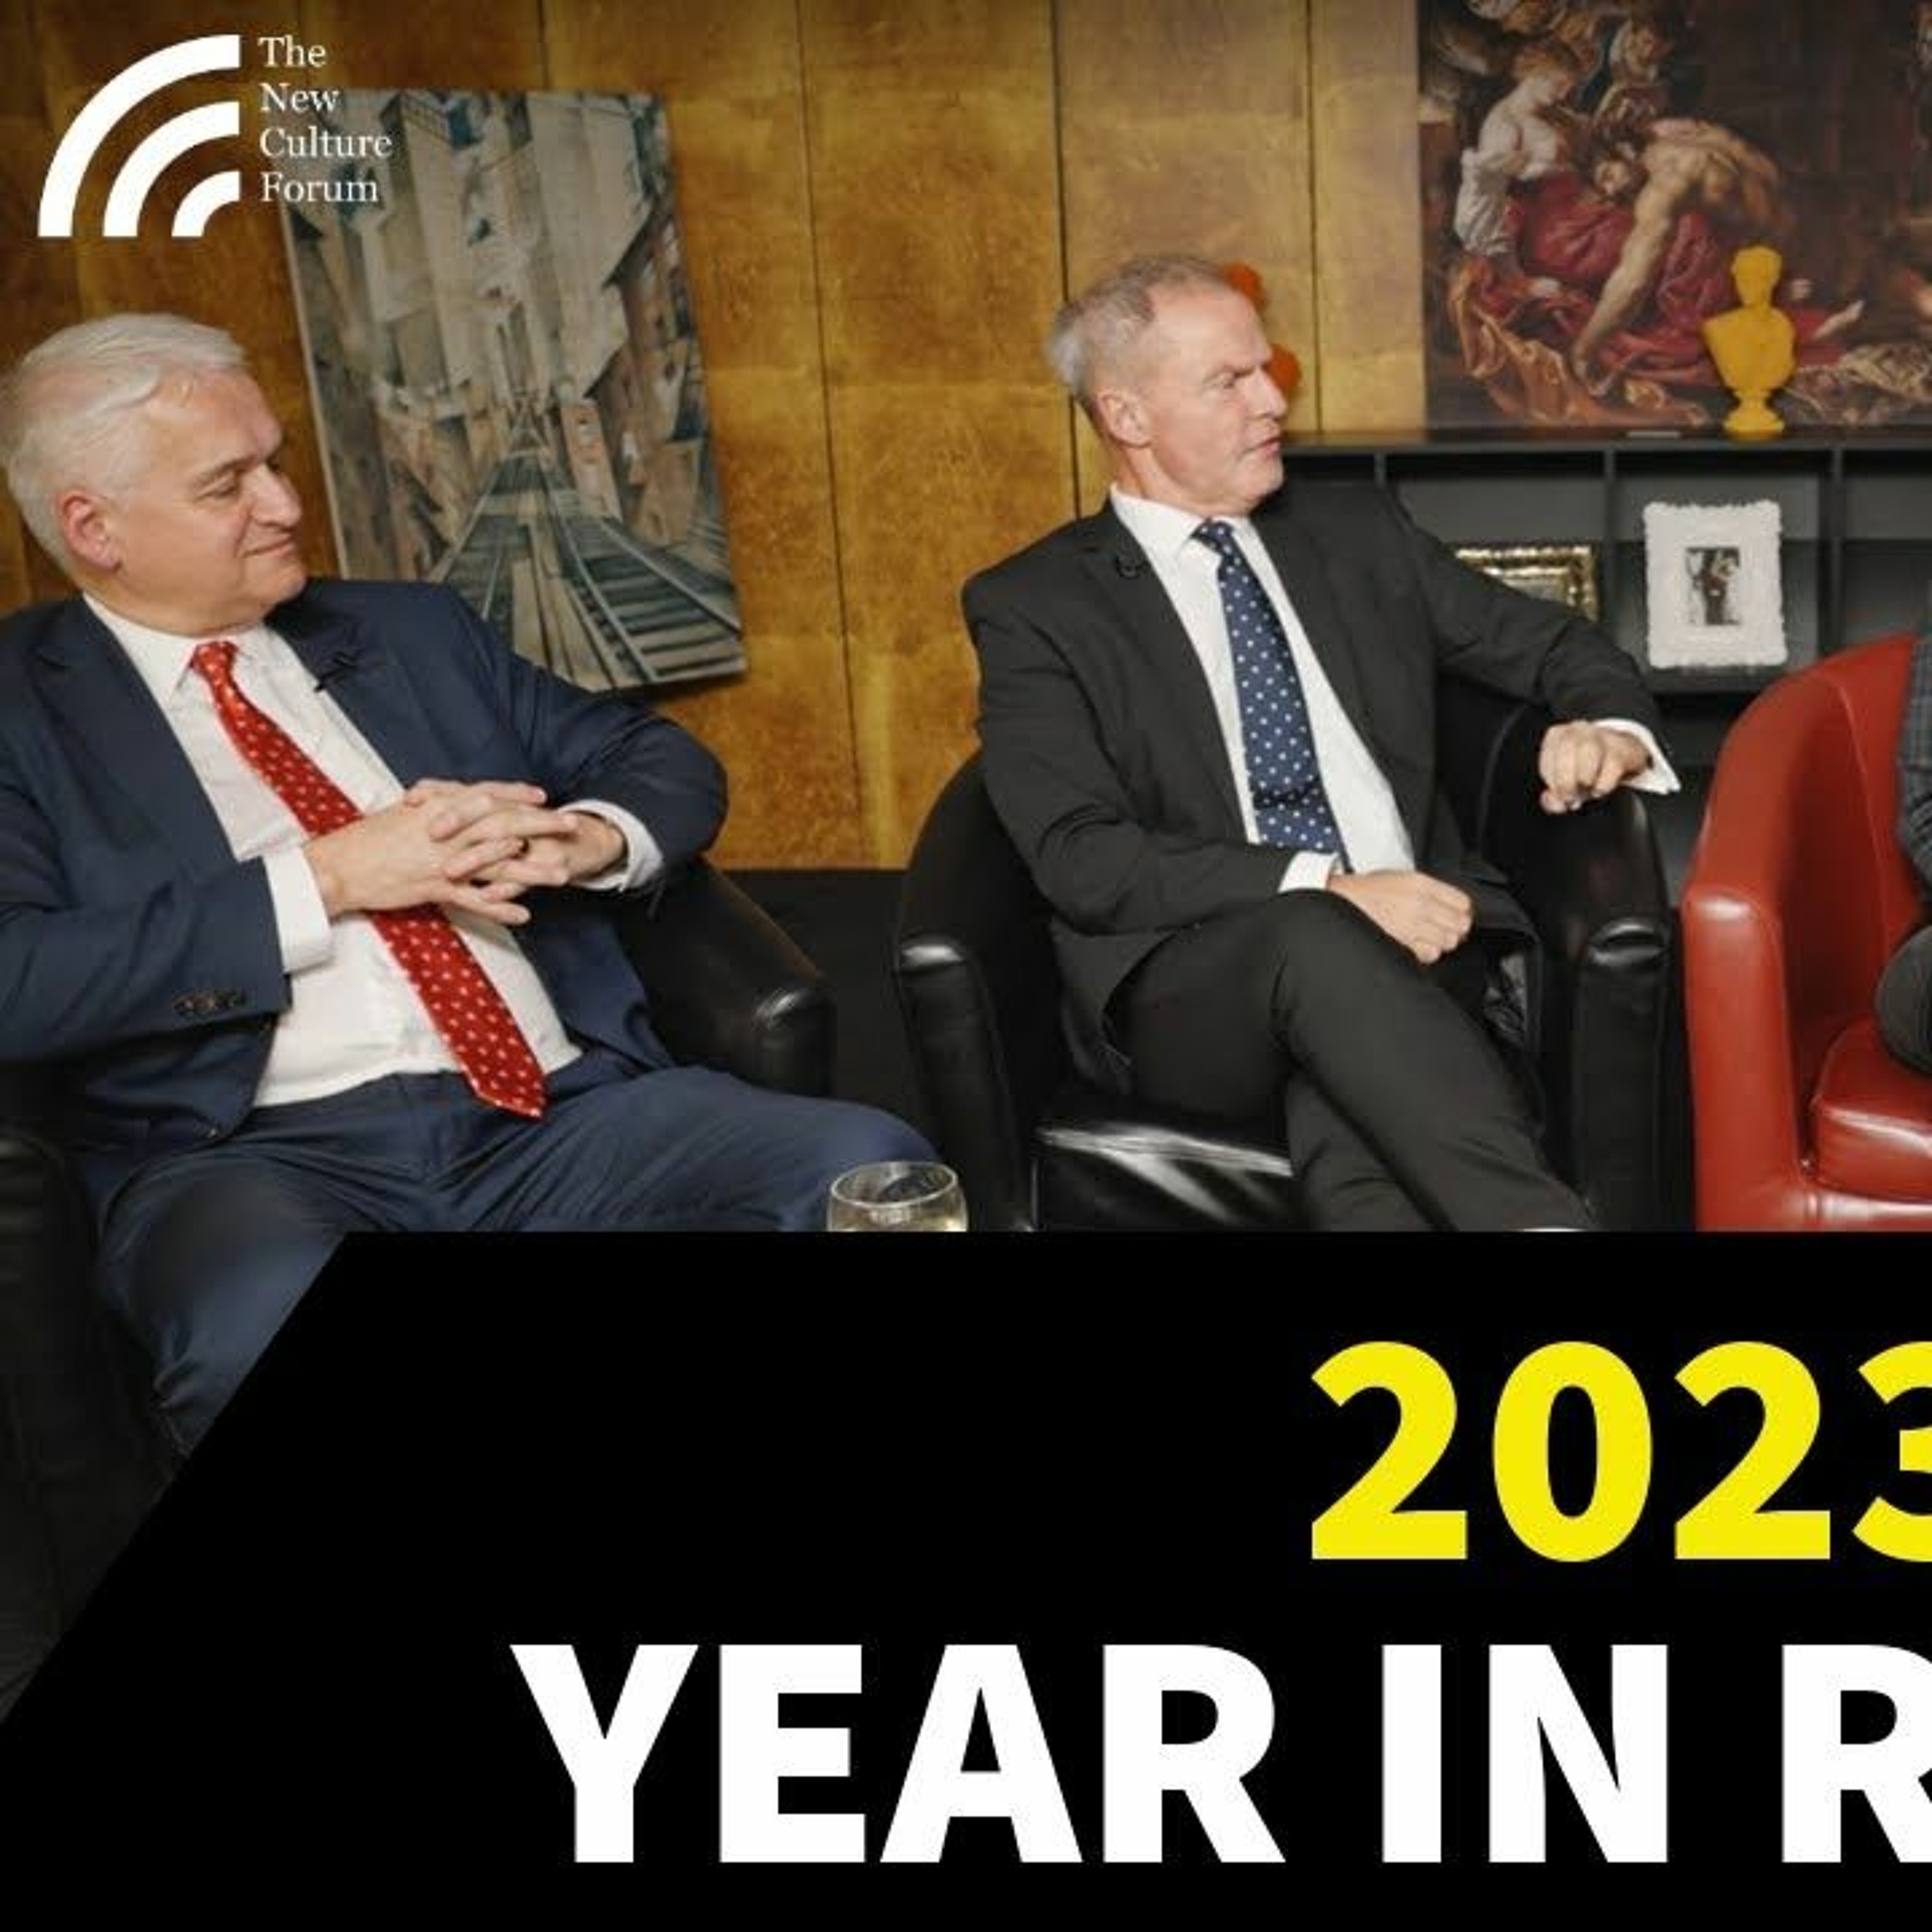 Was 2023 Peak Woke or will 2024 be Worse? Islamism on Our Streets & 2-Tier Policing. 2023 in Review.